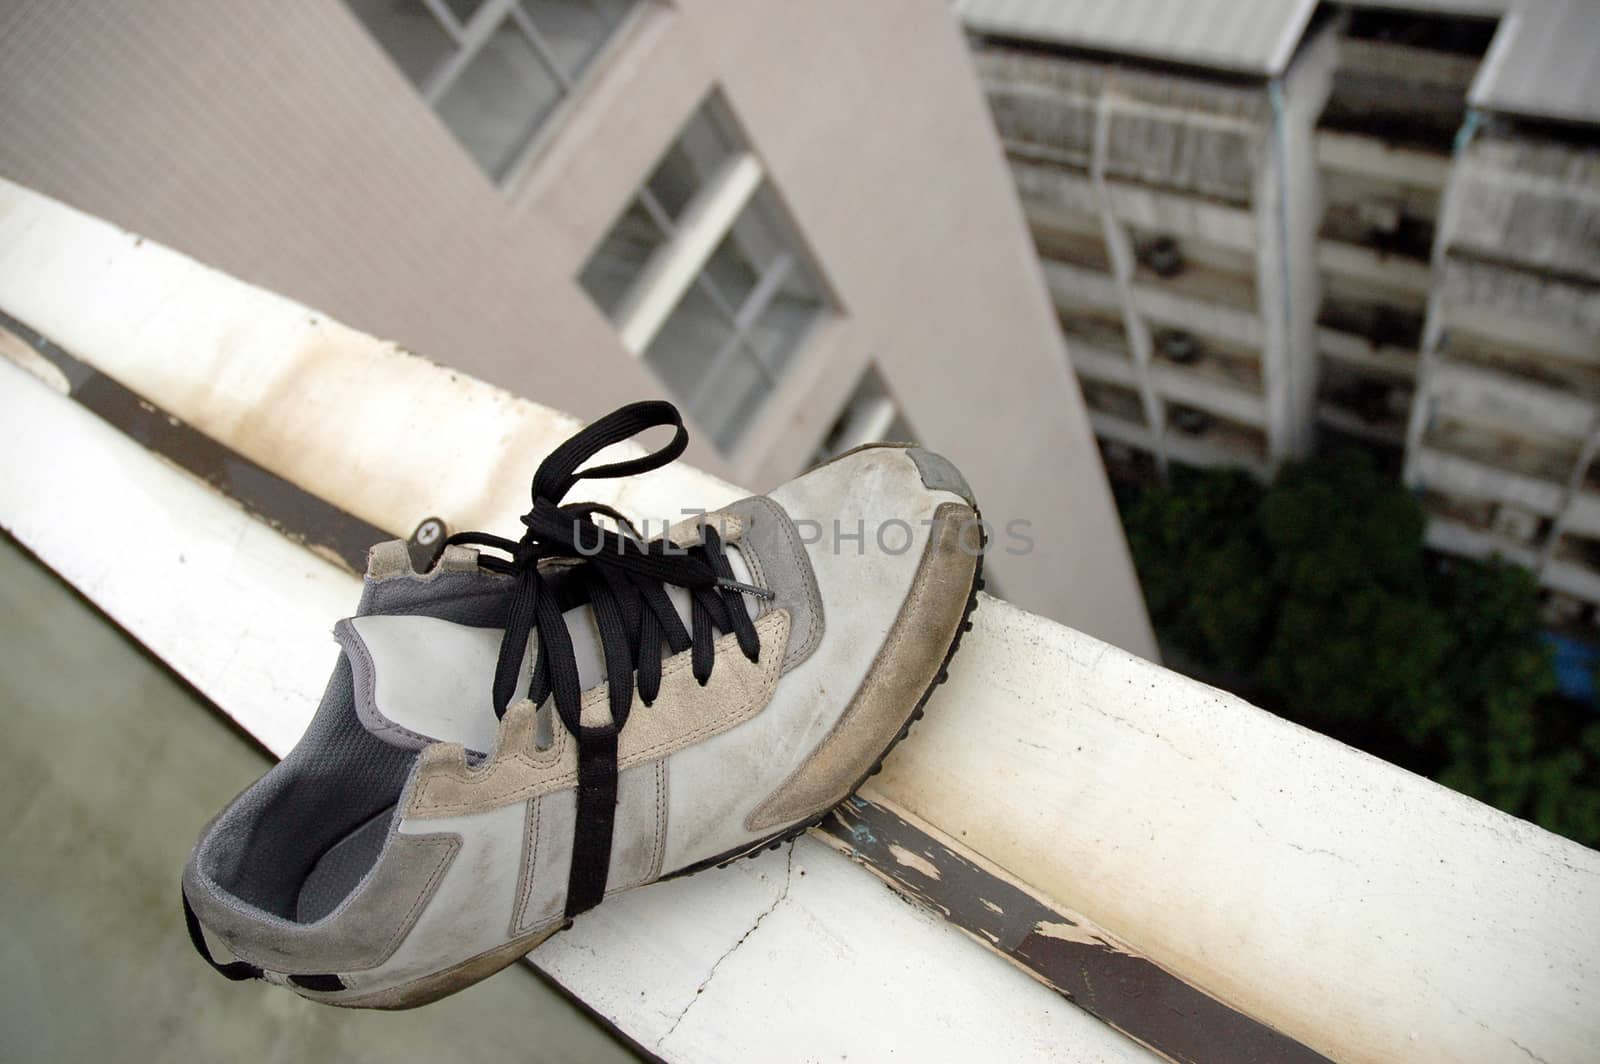 leftover shoe at the edge of a building roof by eyeofpaul